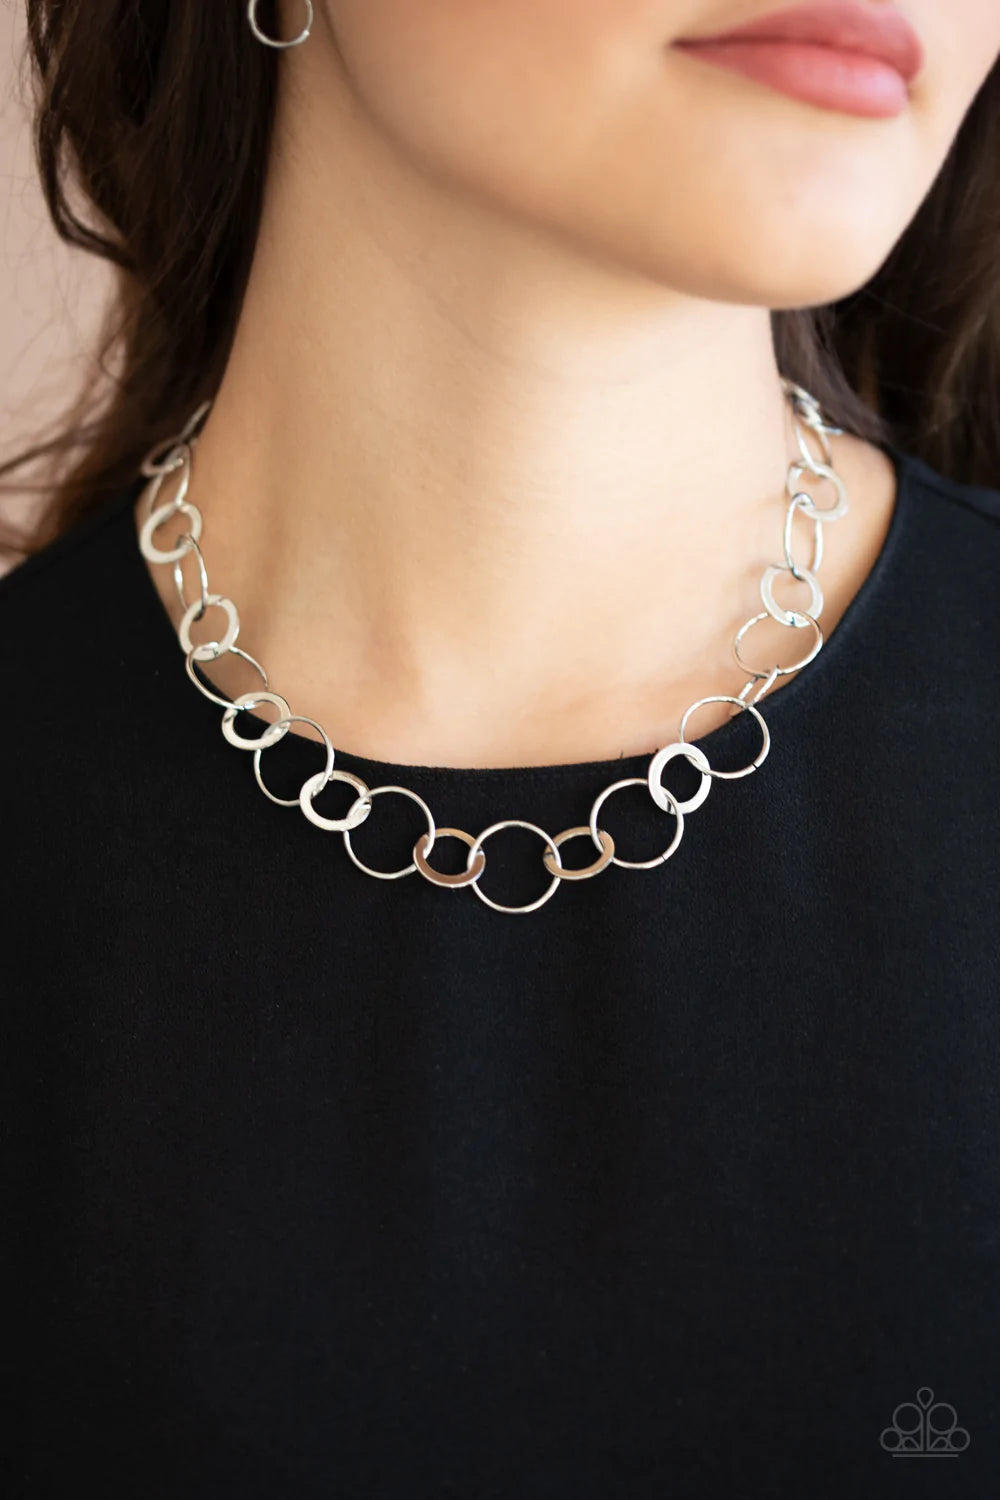 Paparazzi Accessories Revolutionary Radiance - Silver Dainty silver hoops and rings delicately link into a chic chain, creating simplistic shimmer below the collar. Features an adjustable clasp closure. Sold as one individual necklace. Includes one pair o